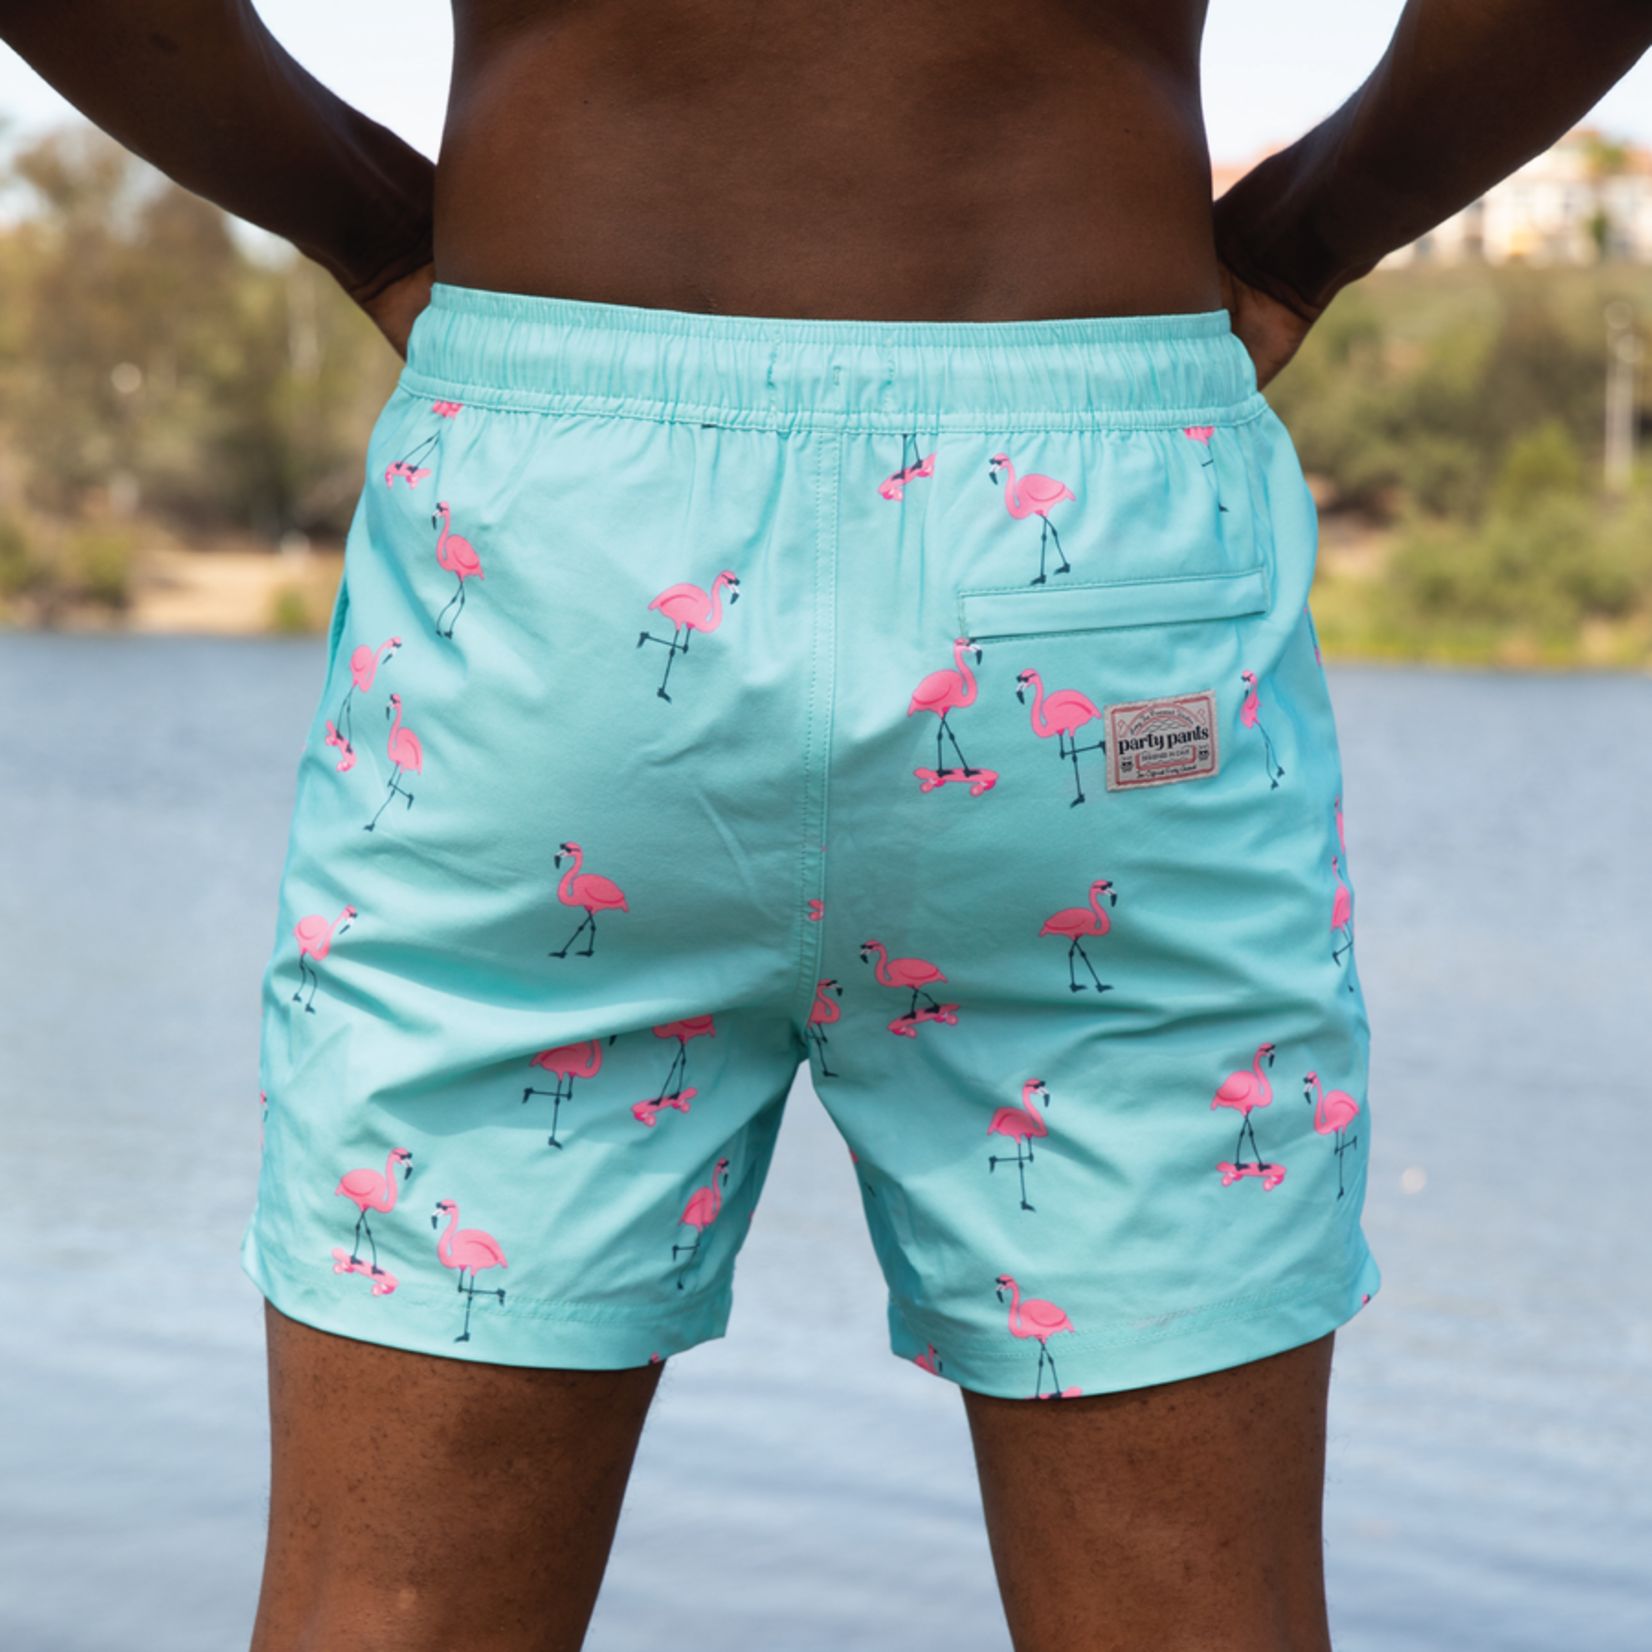 Party Pants Cruisers Compression Shorts